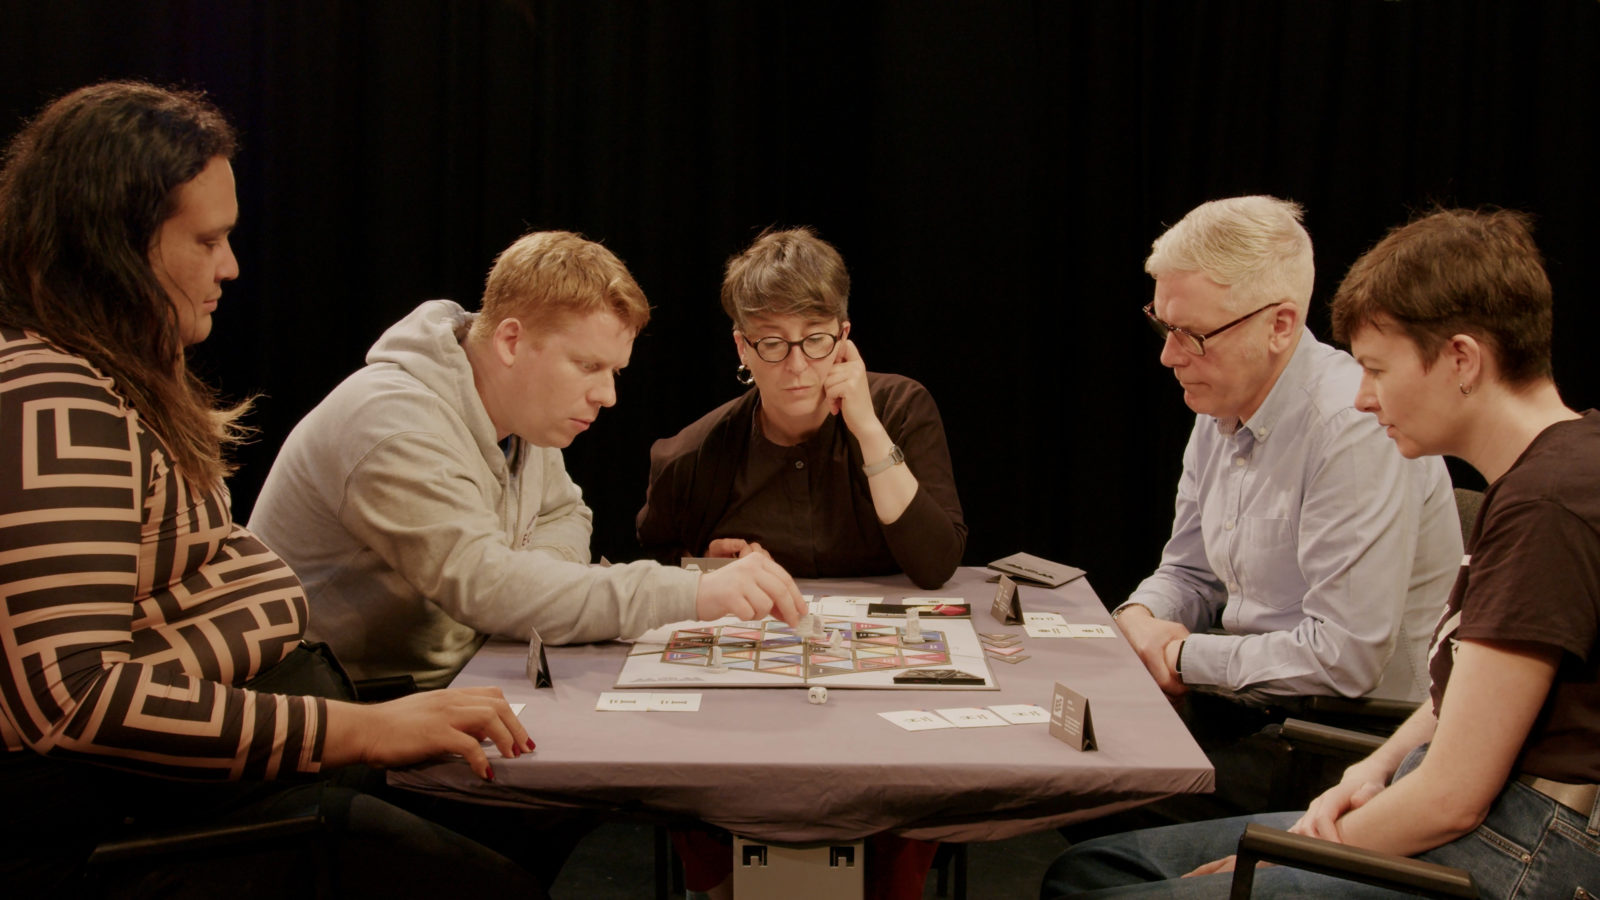 5 people sit around the table playing the game, they are all looking thoughtful and concentrating, one person reaches out and moves a piece on the board.